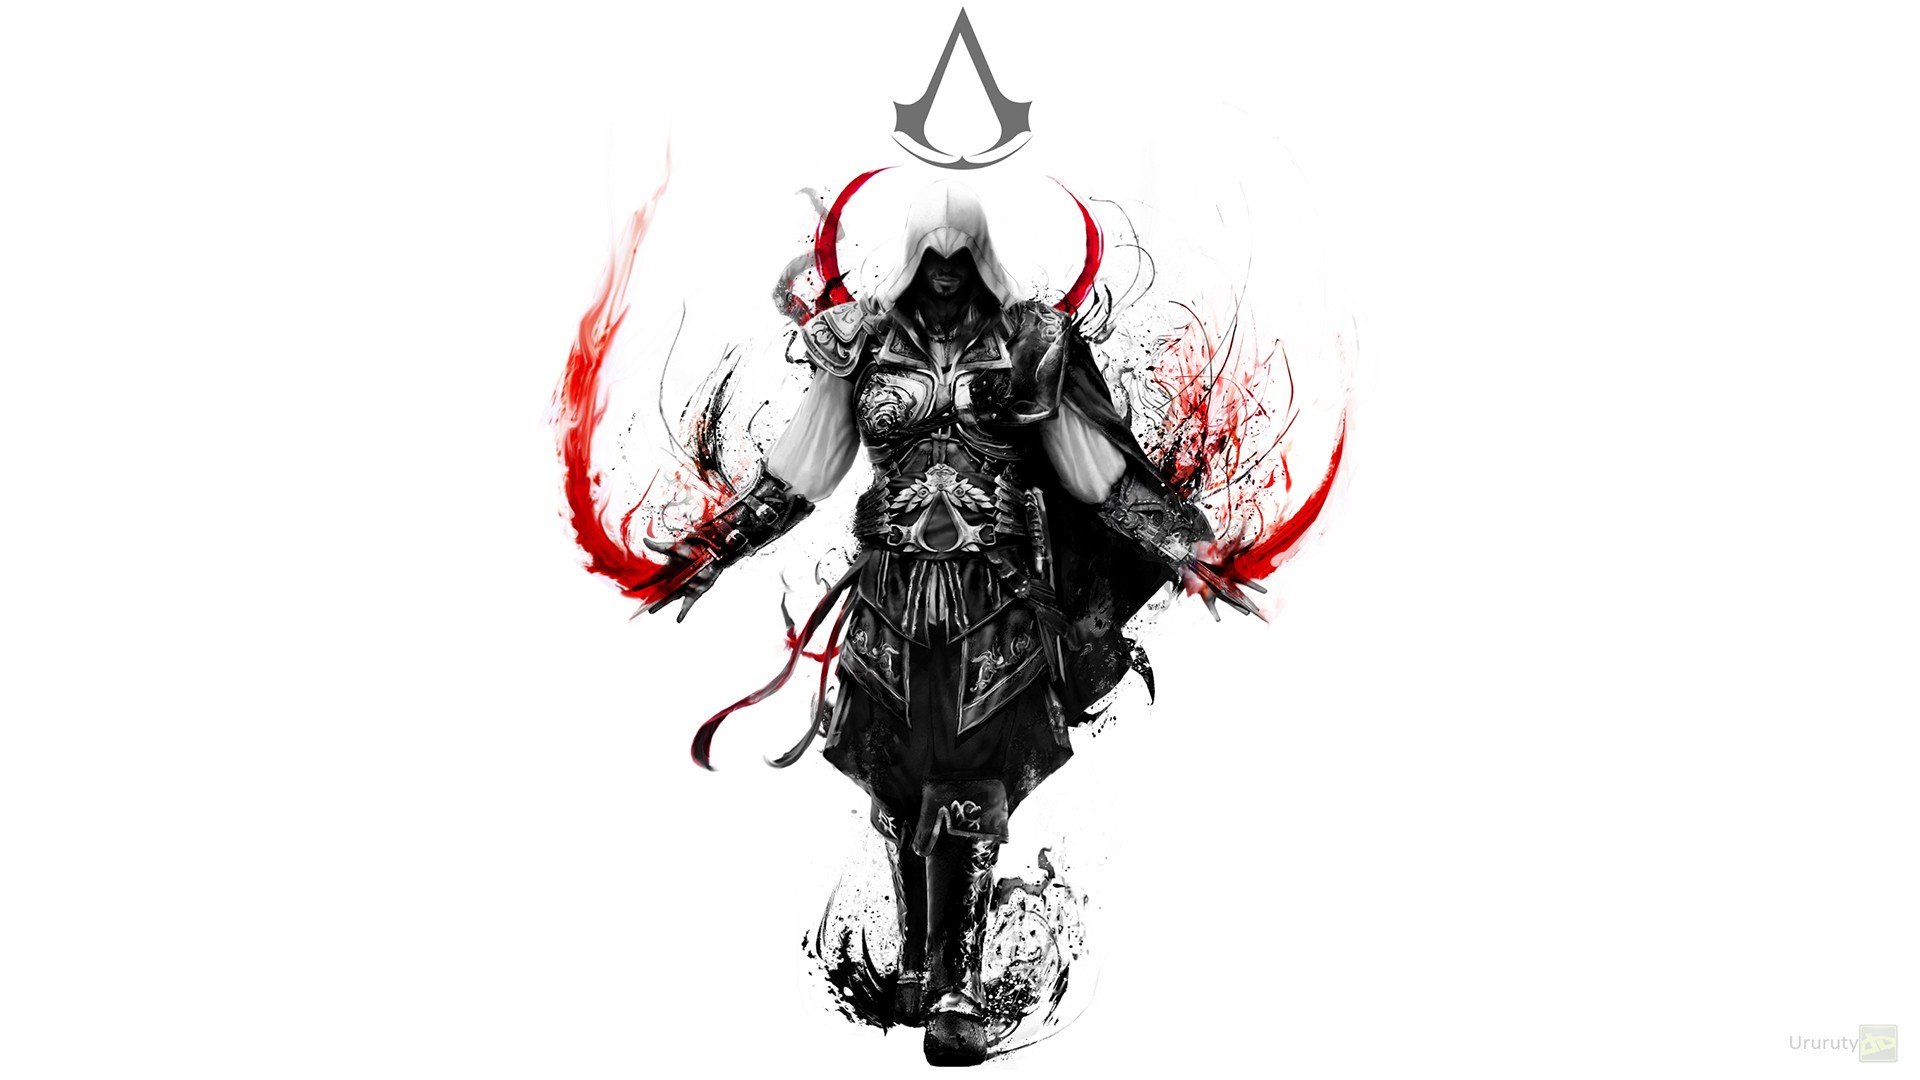 General 1920x1080 video games Assassin's Creed: Brotherhood video game art selective coloring simple background white background DeviantArt video game men video game characters